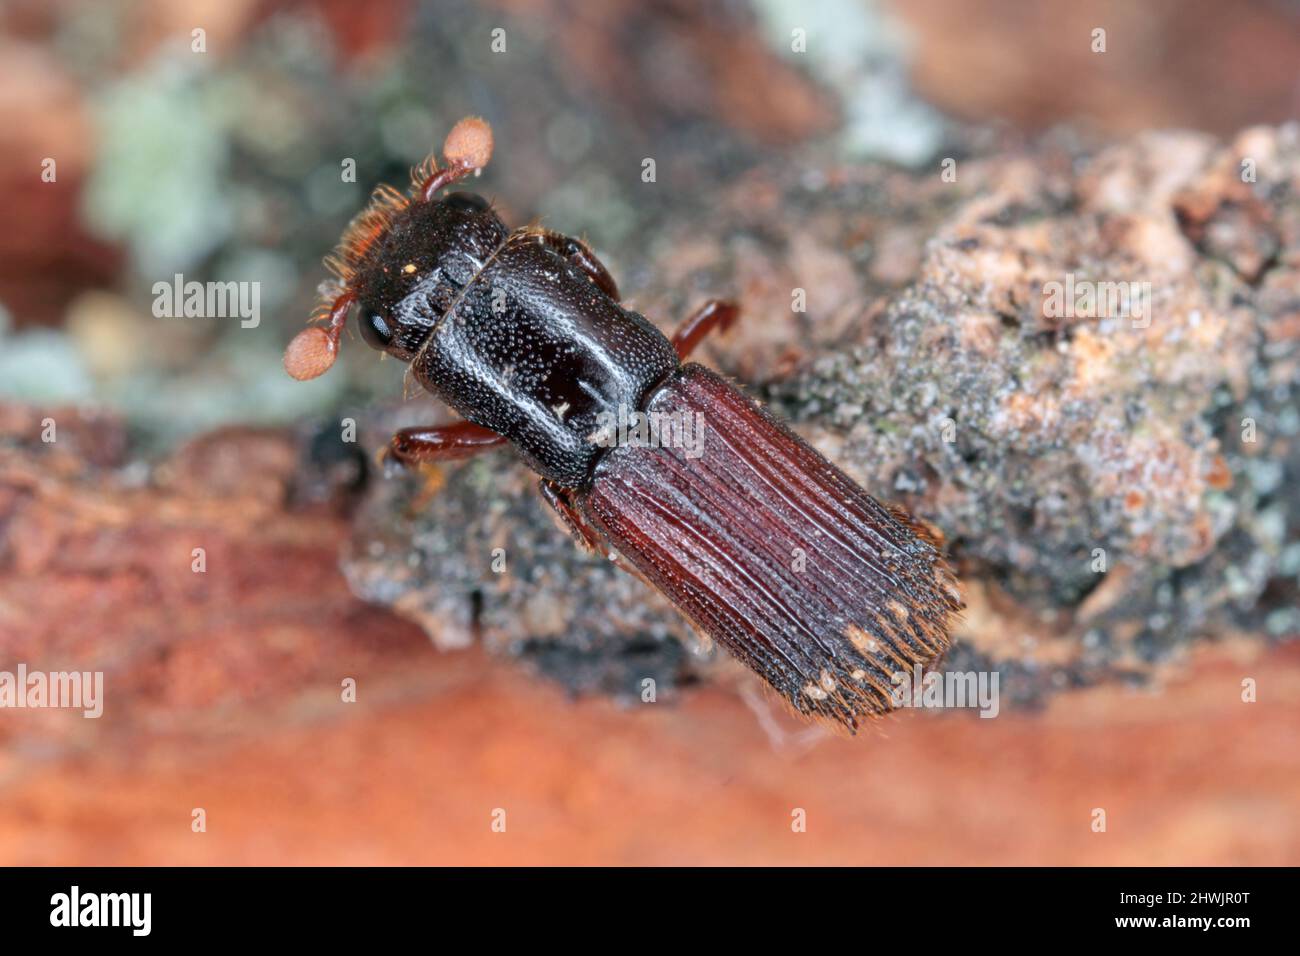 Platypus cylindrus, commonly known as the oak pinhole borer, is a species of ambrosia beetle in the weevil family Curculionidae formerly Platypodidae. Stock Photo